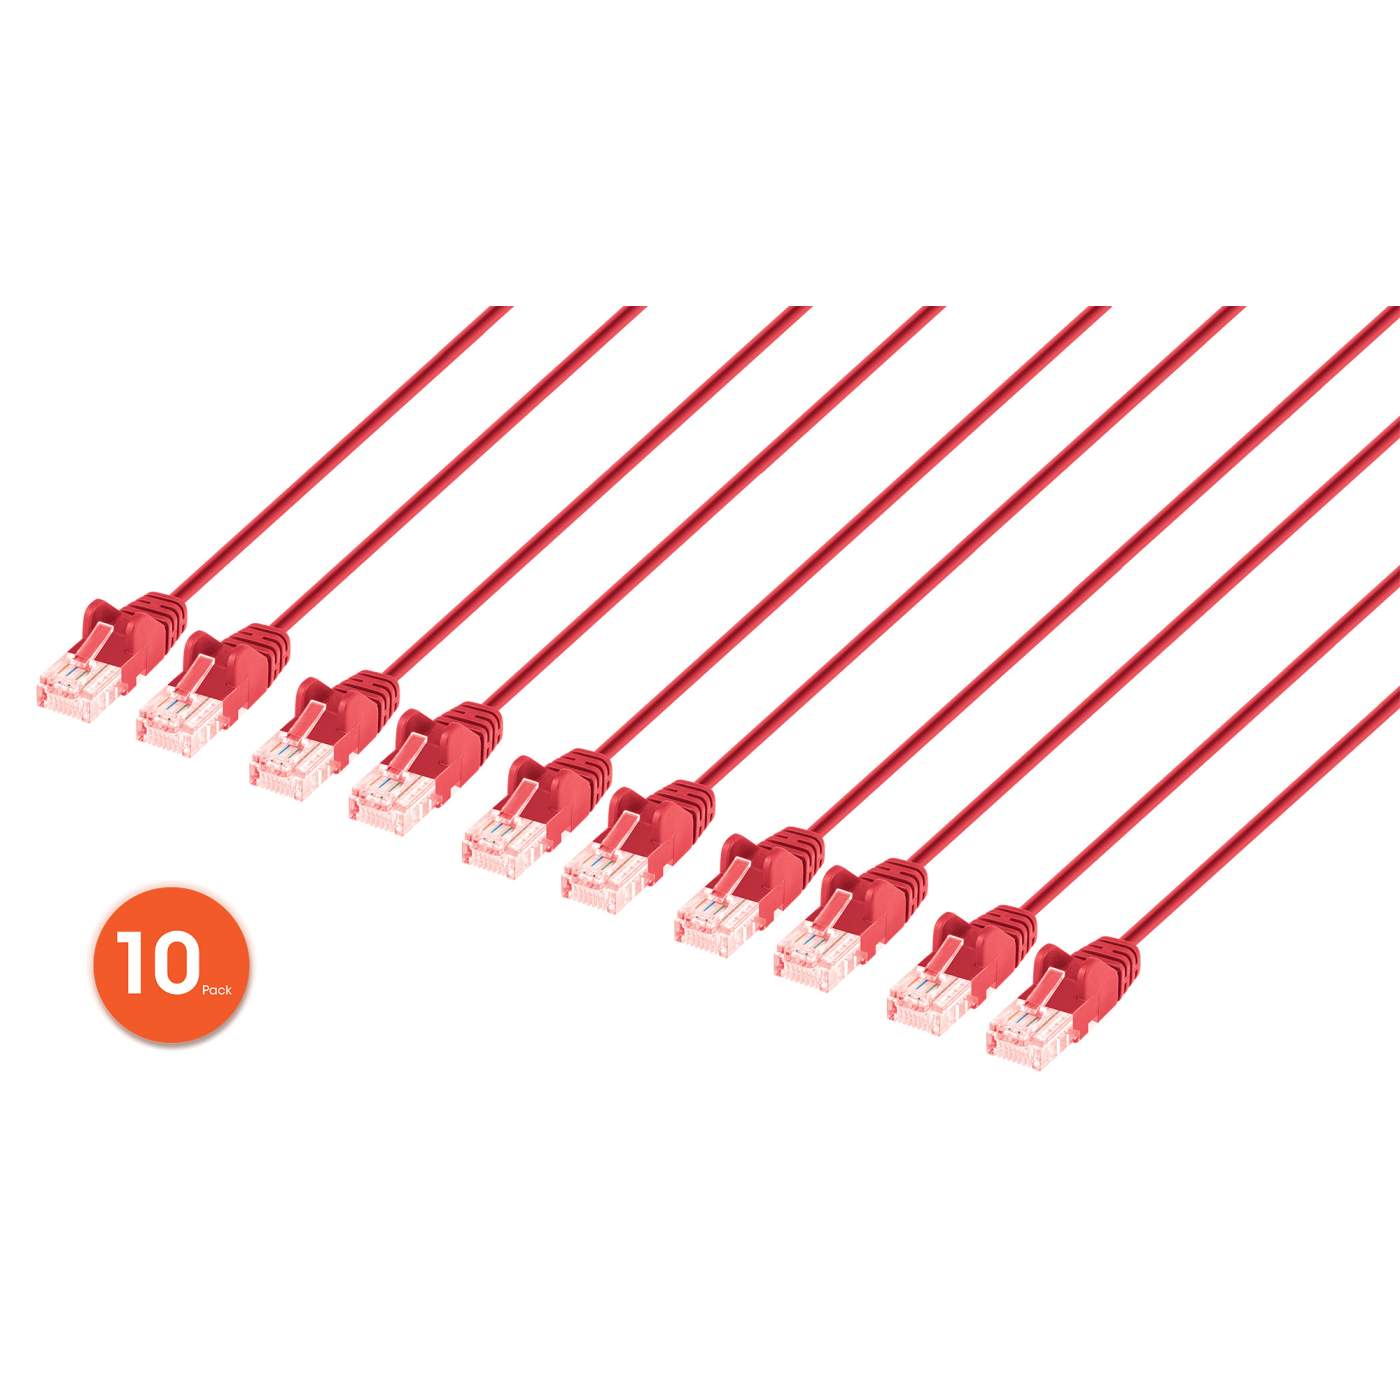 Cat6 U/UTP Slim Network Patch Cable, 14 ft., Red, 10-Pack Image 1